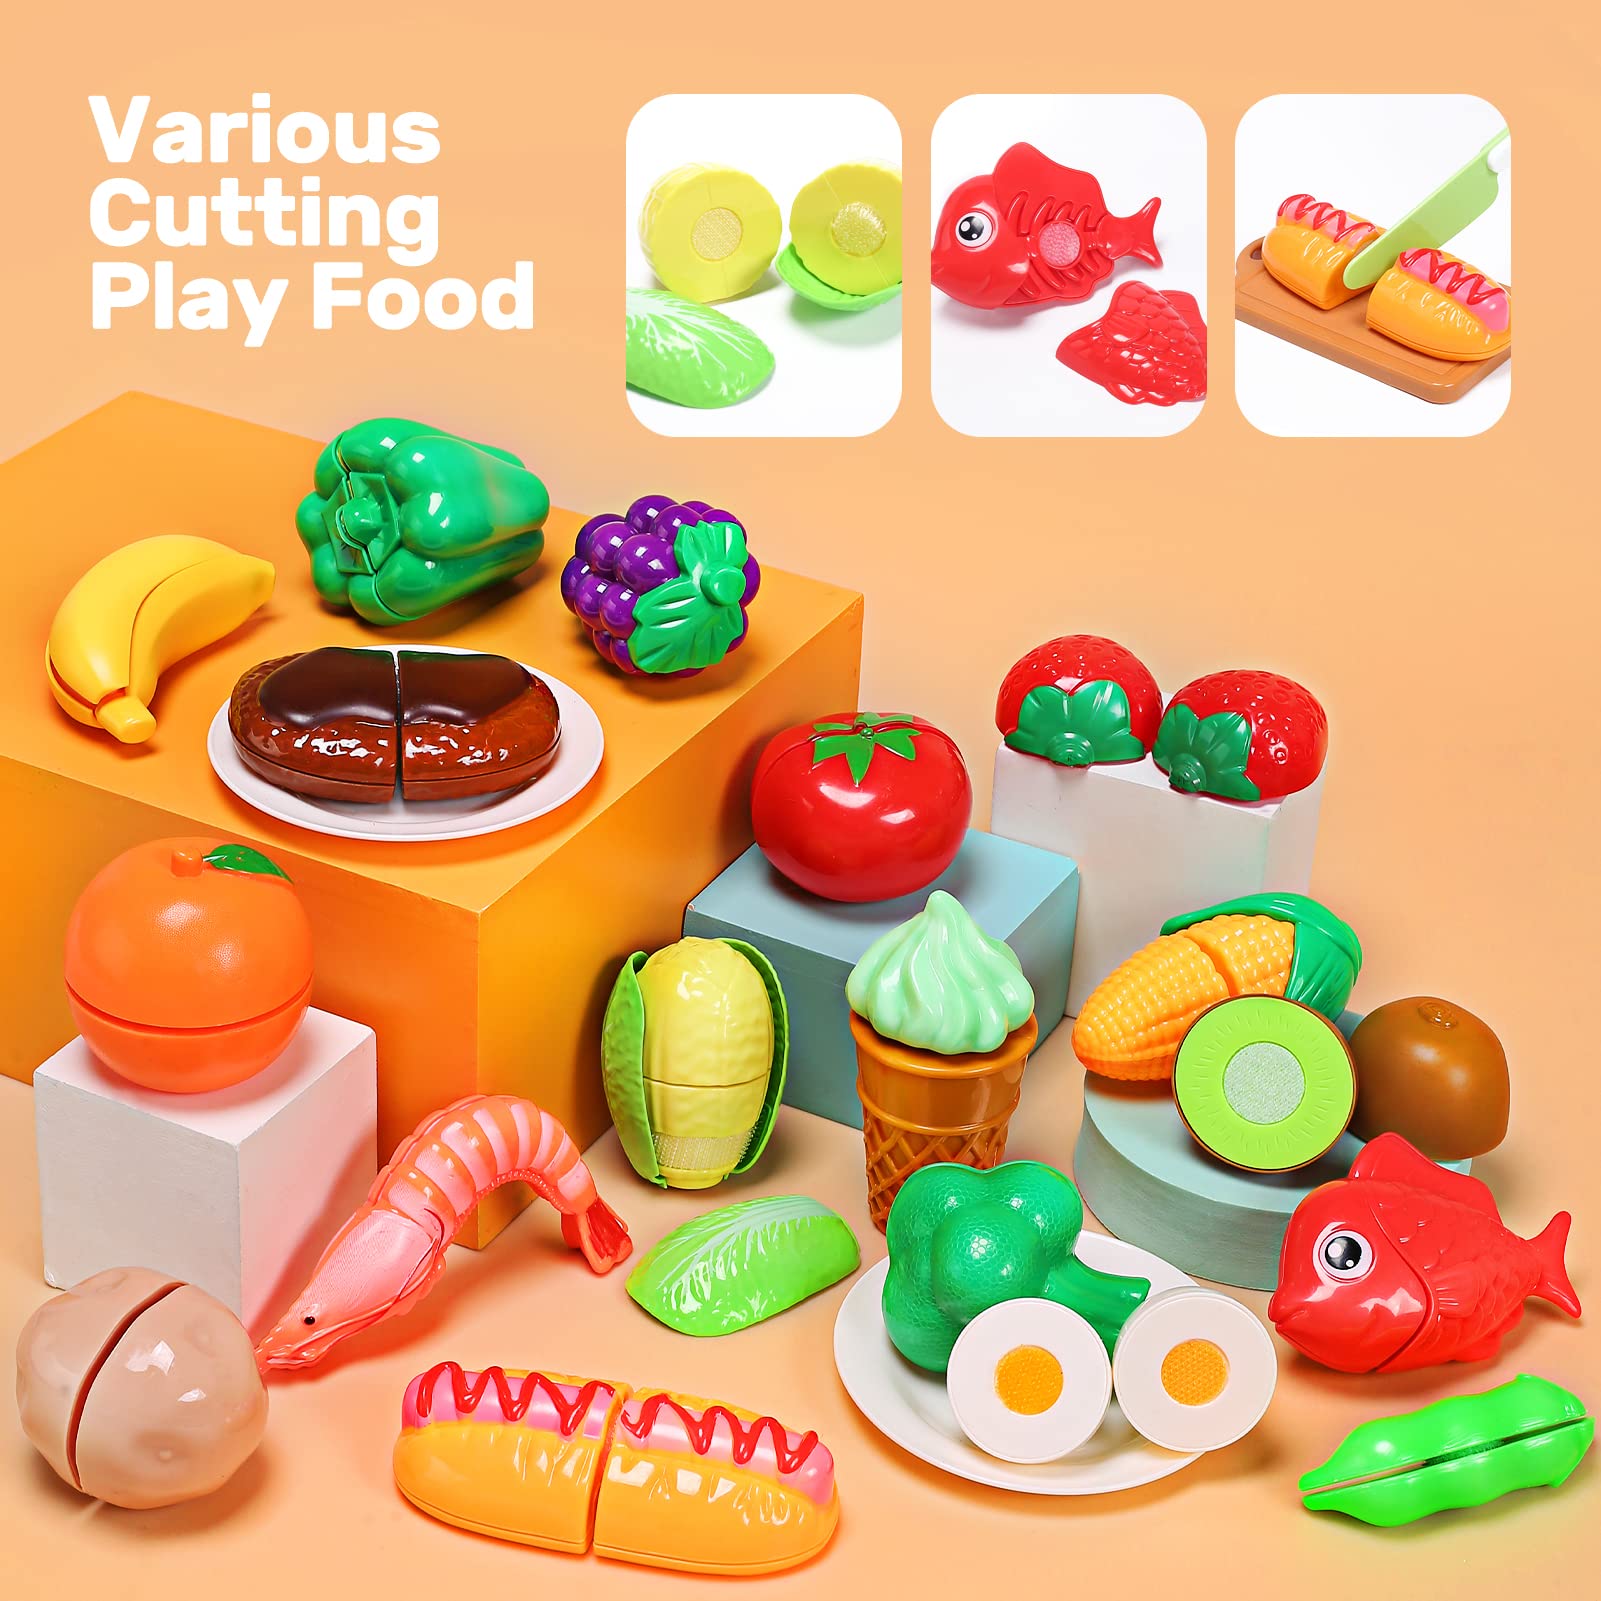 CUTE STONE Pretend Play Kitchen Accessories Toy, Kids Kitchen Playset with  Stainless Steel Play Pots and Pans, Cutting Play Food. Storage Box, Cooking